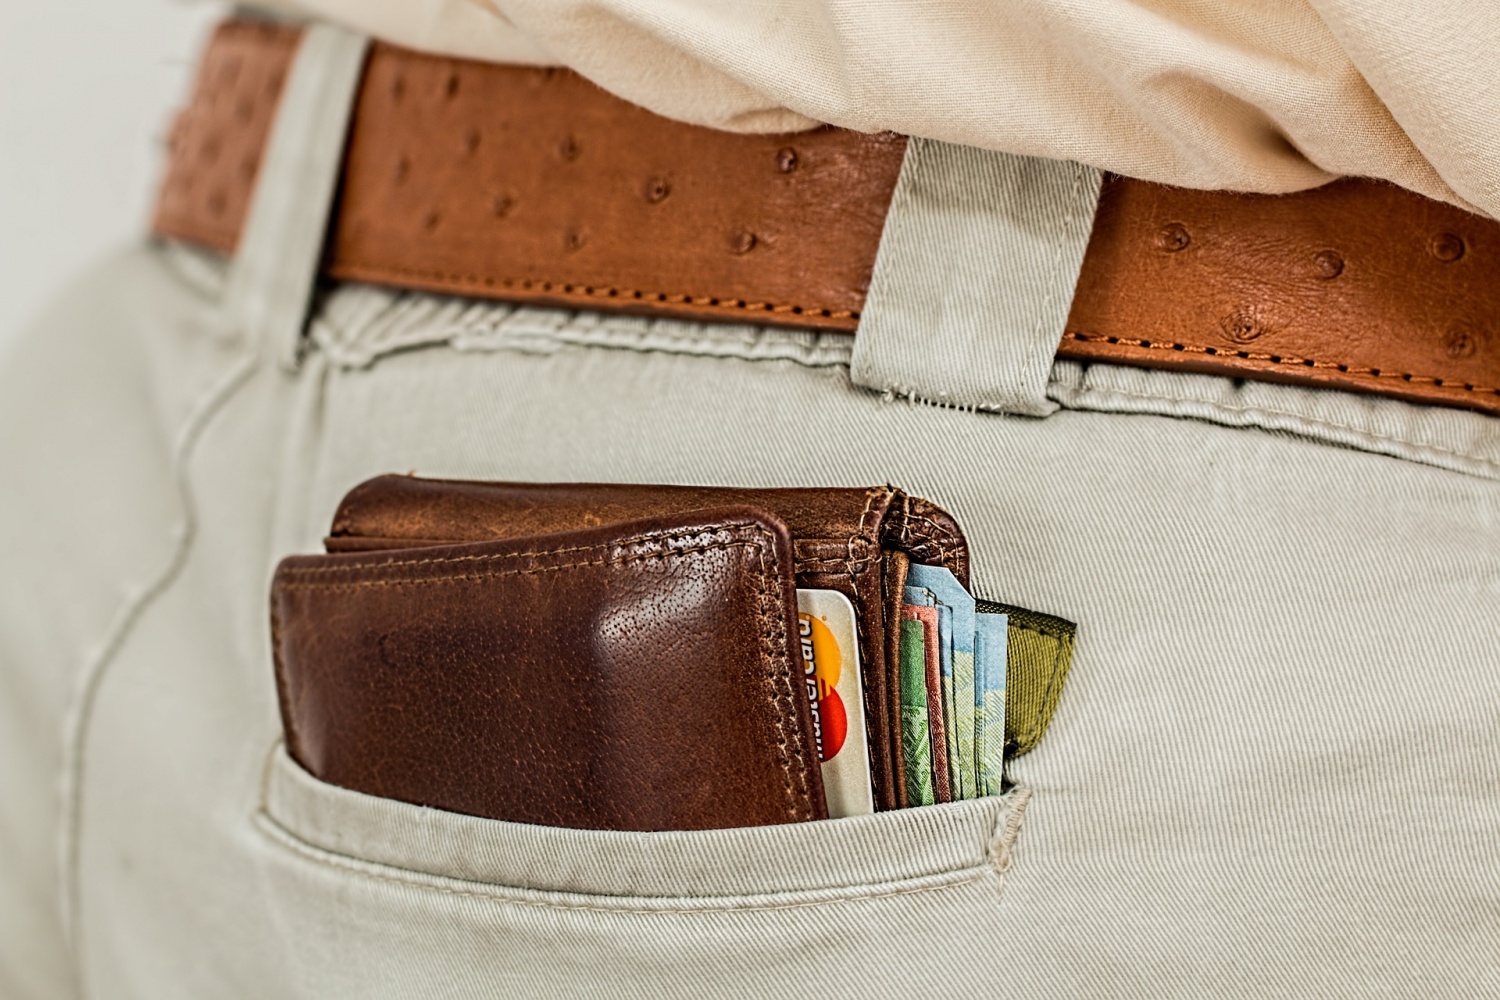 Moral Concerns Override Desire To Profit From Finding A Lost Wallet